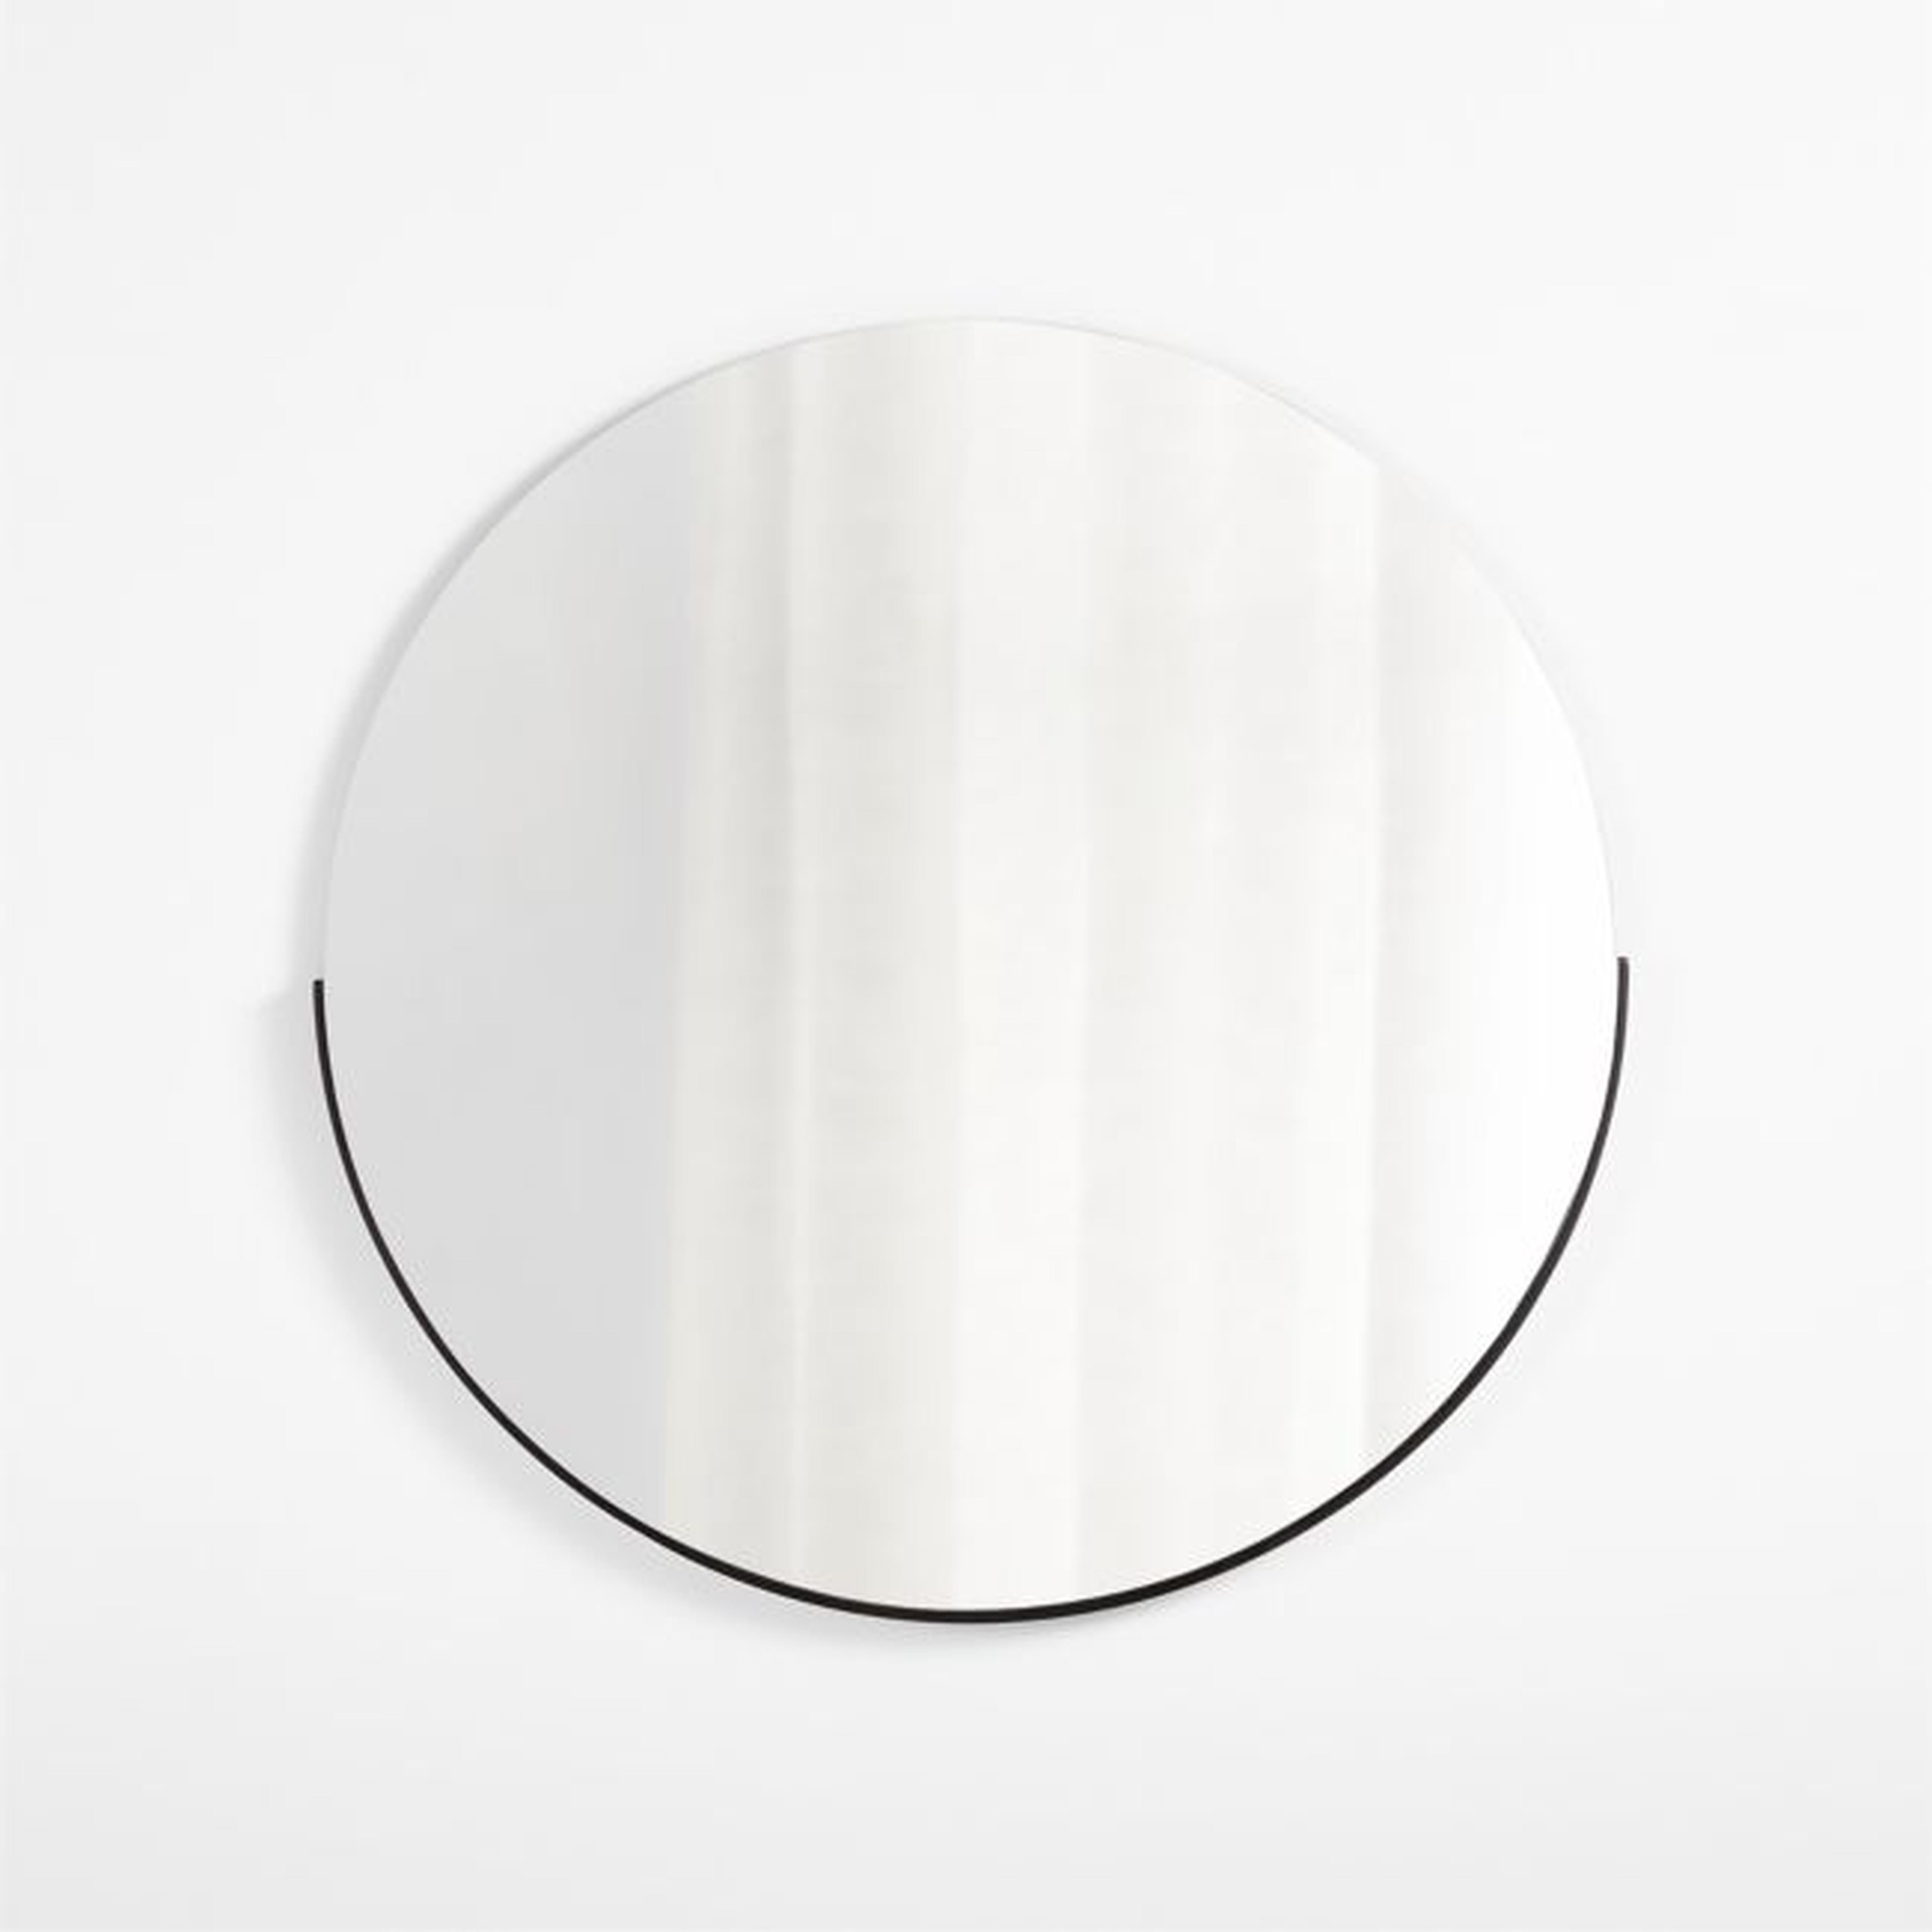 Gerald Large Round Black Wall Mirror - Crate and Barrel